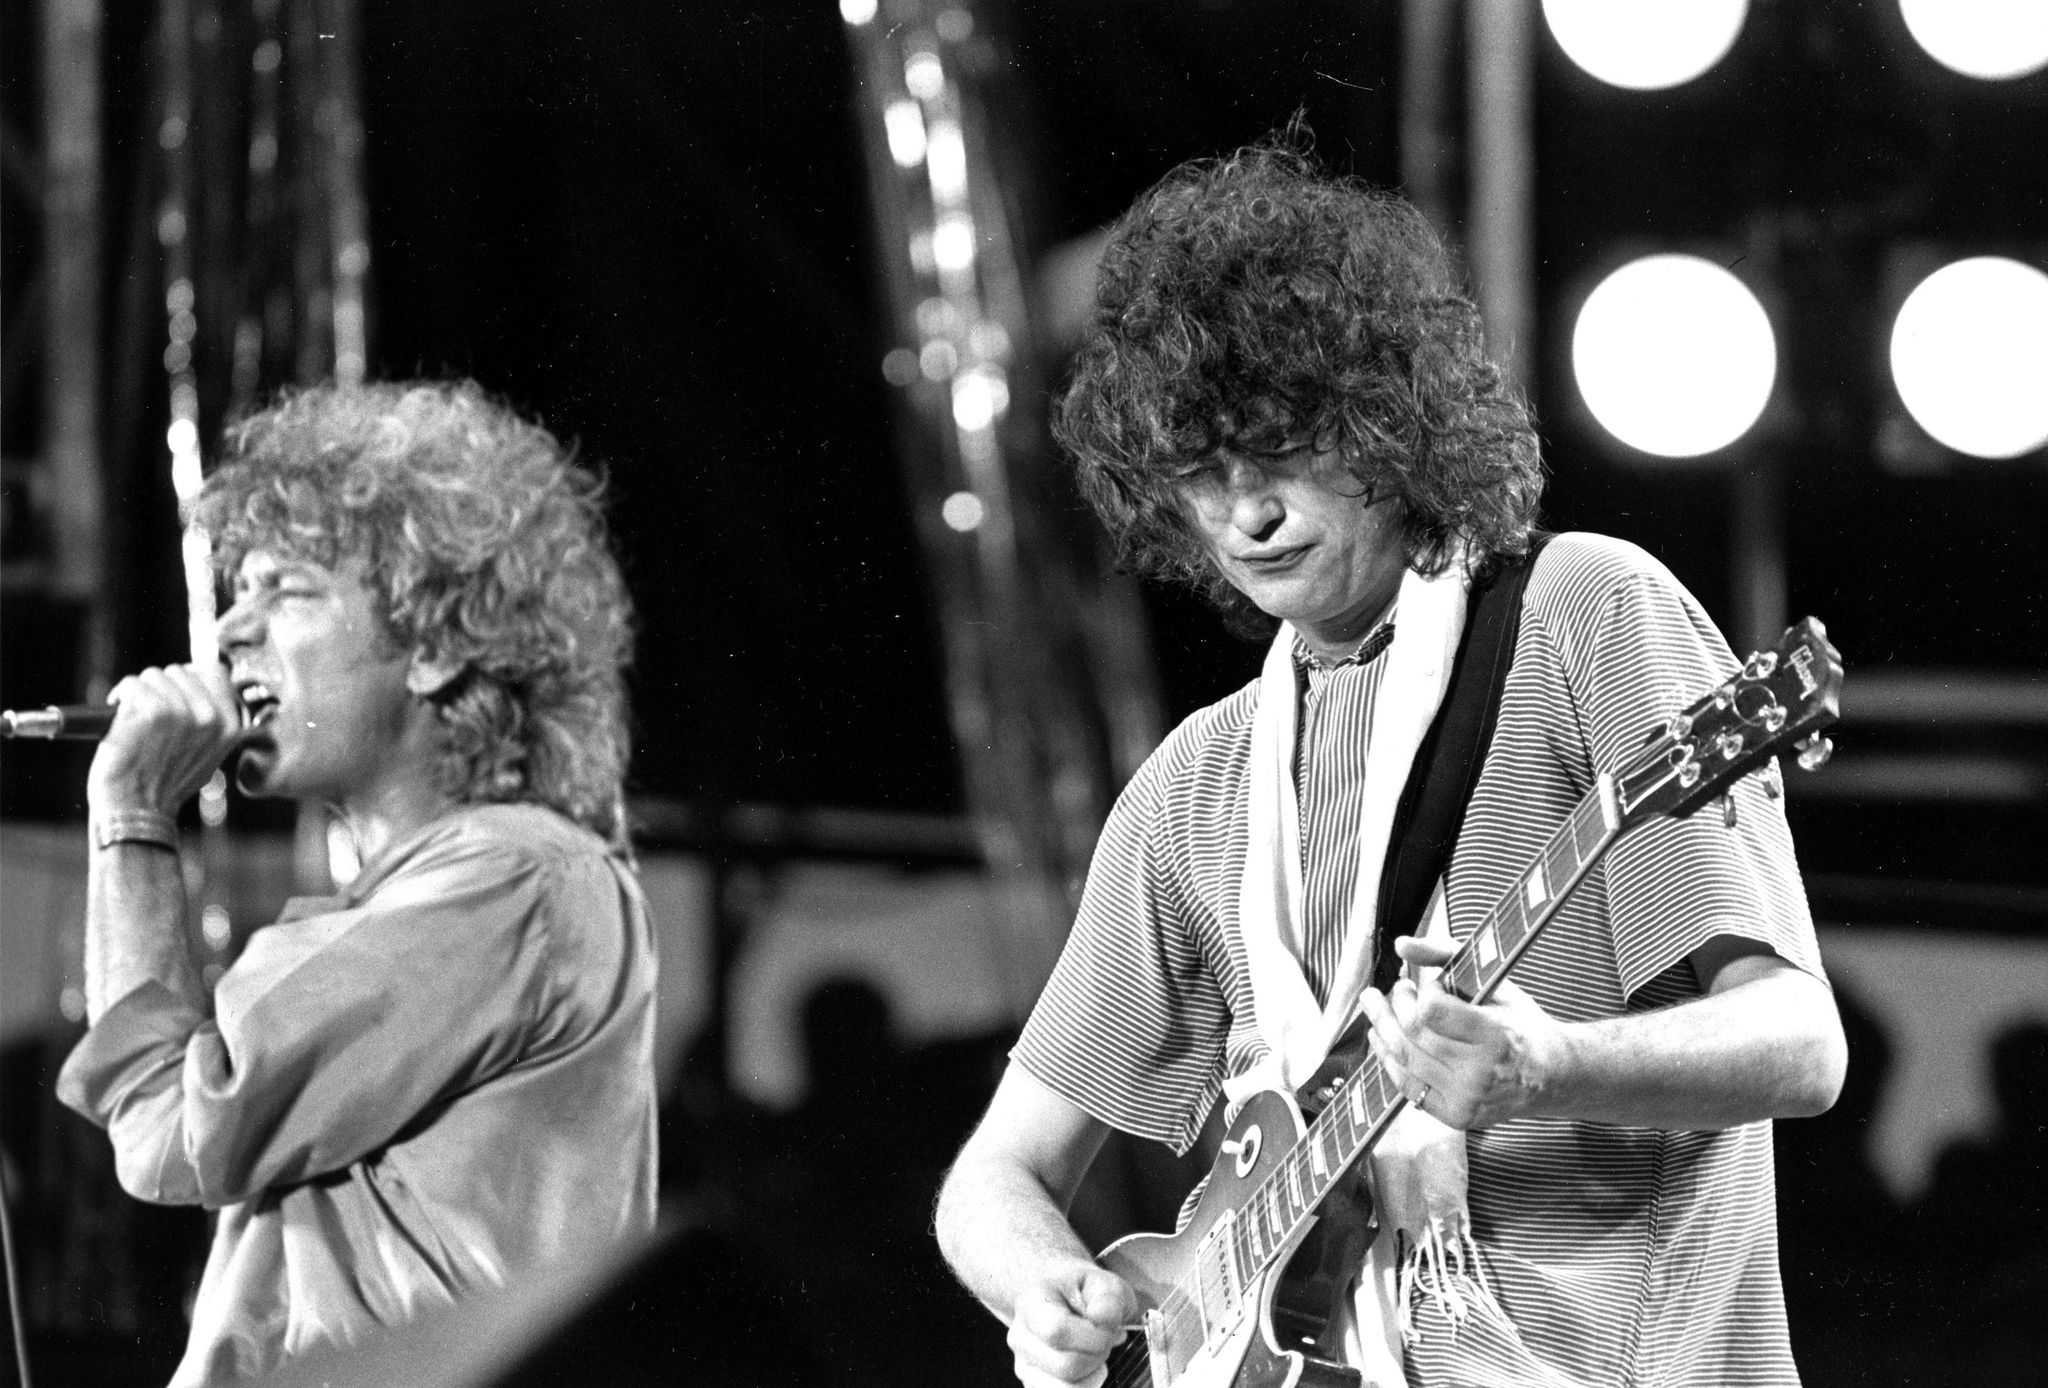 Robert Plant and guitarist Jimmy Page of the British rock band Led Zeppelin perform at the Live Aid concert at Philadelphia’s J.F.K. Stadium on July 13, 1985.